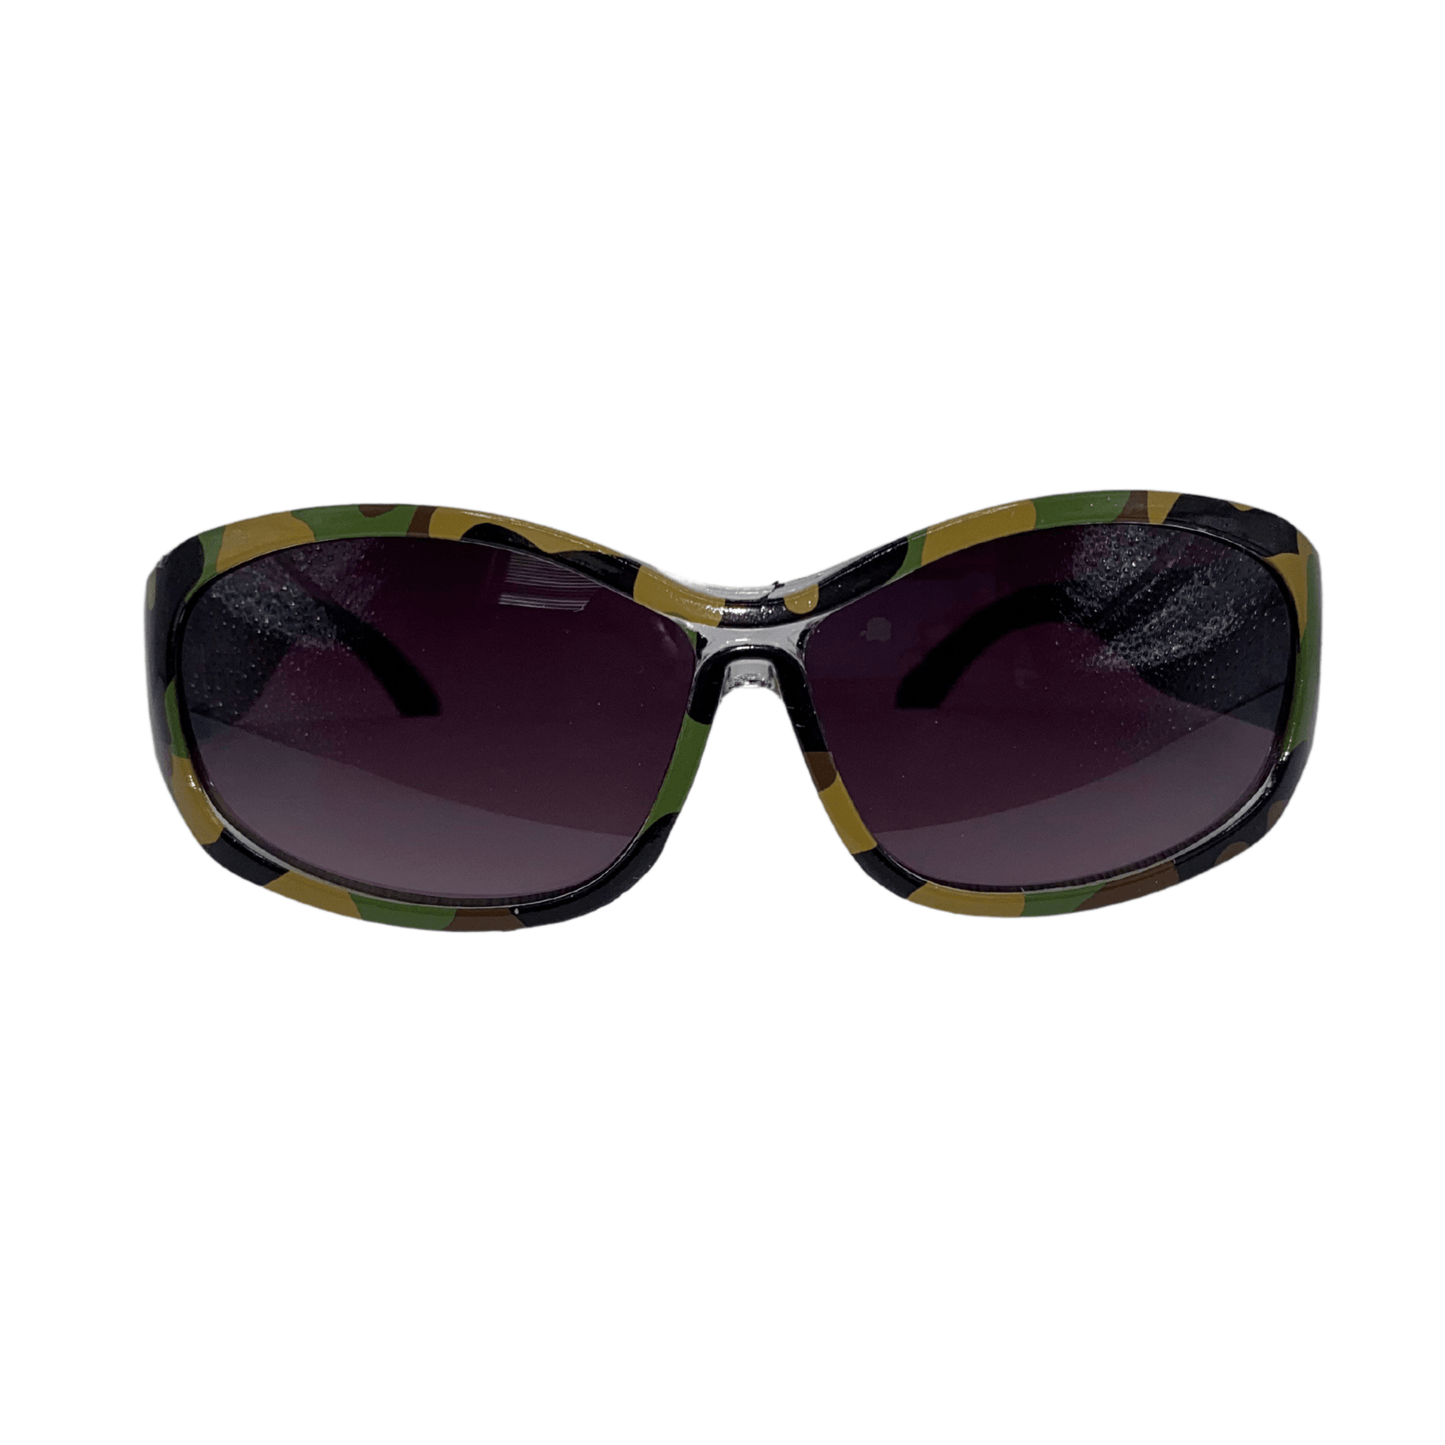 Be ready to block the sun with these green camouflage sunglasses with green arms.